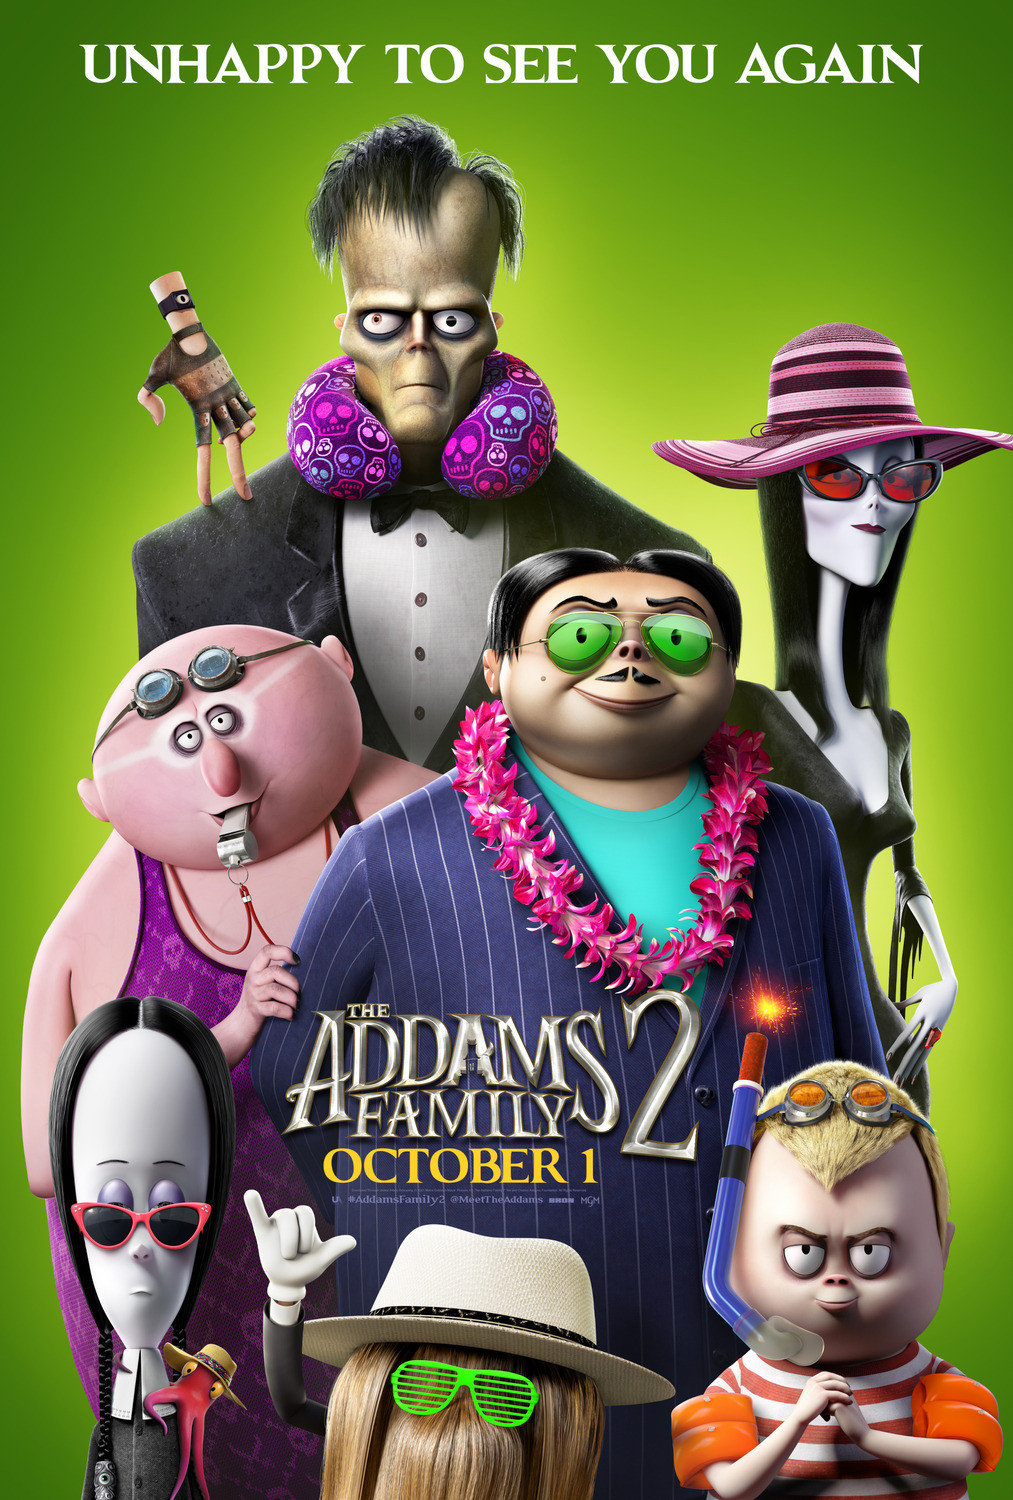 The Addams Family 2 Reviews - Metacritic